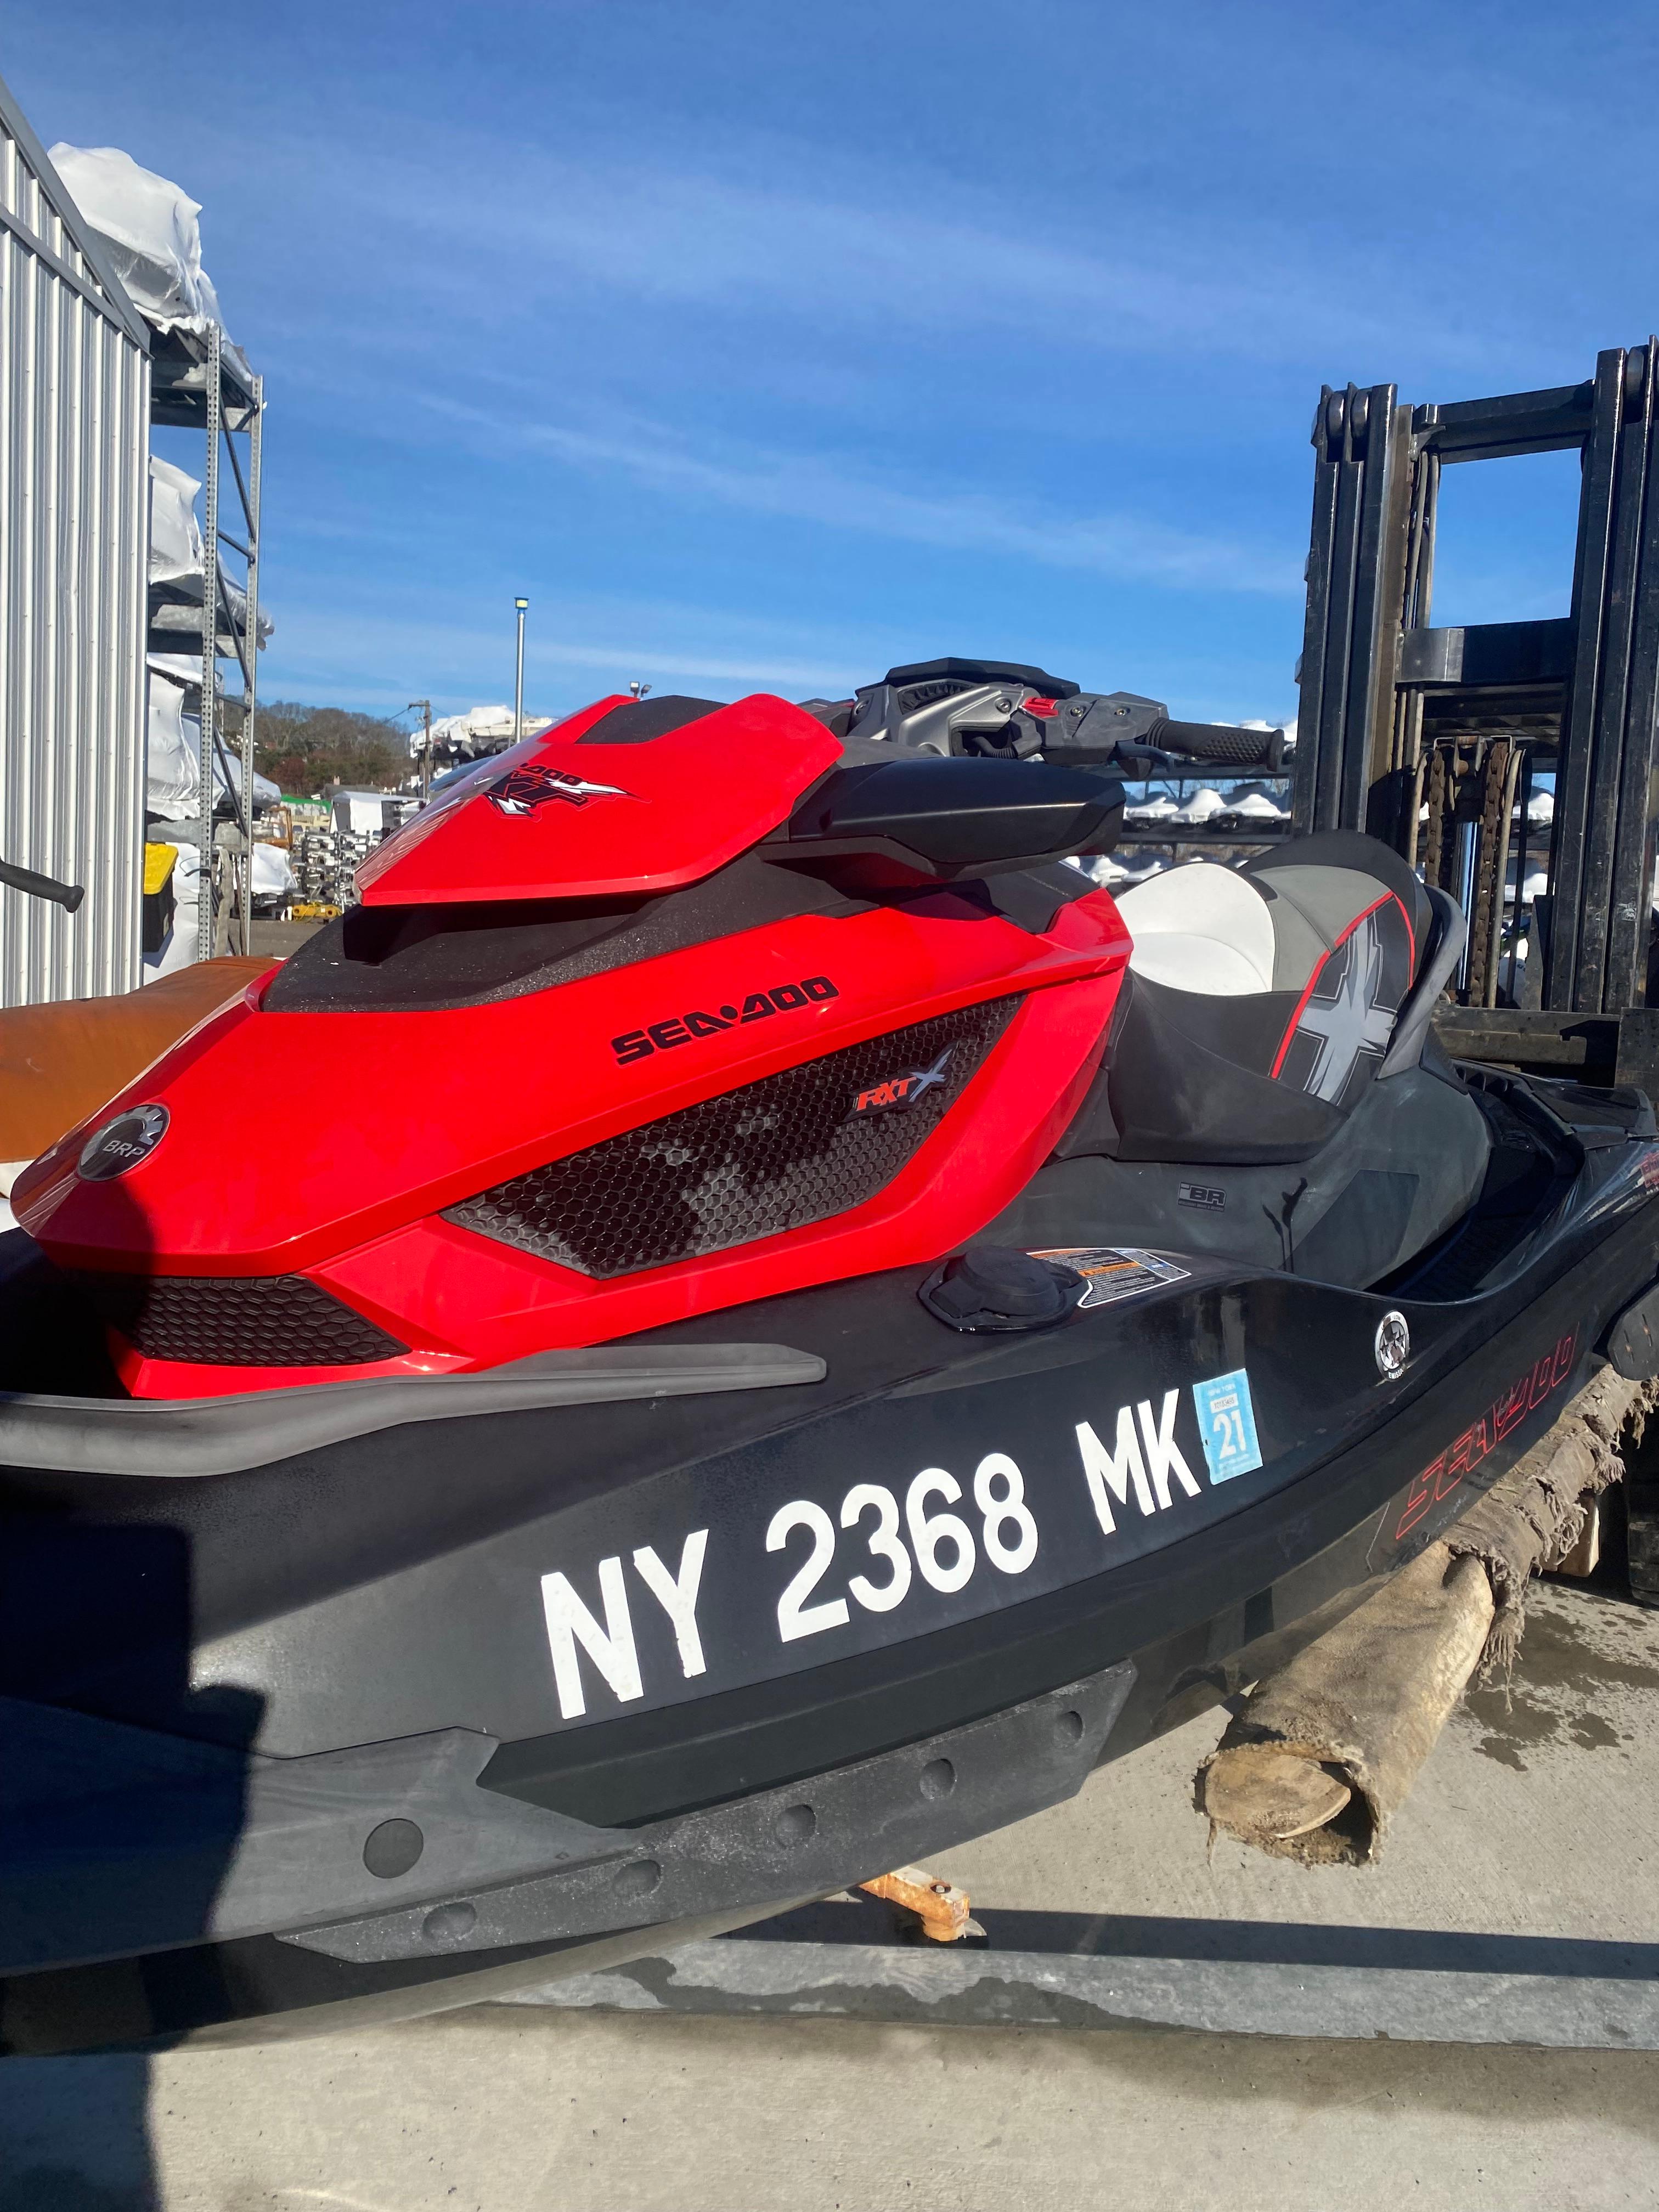 Explore Sea-Doo Rxt Boats For Sale - Boat Trader